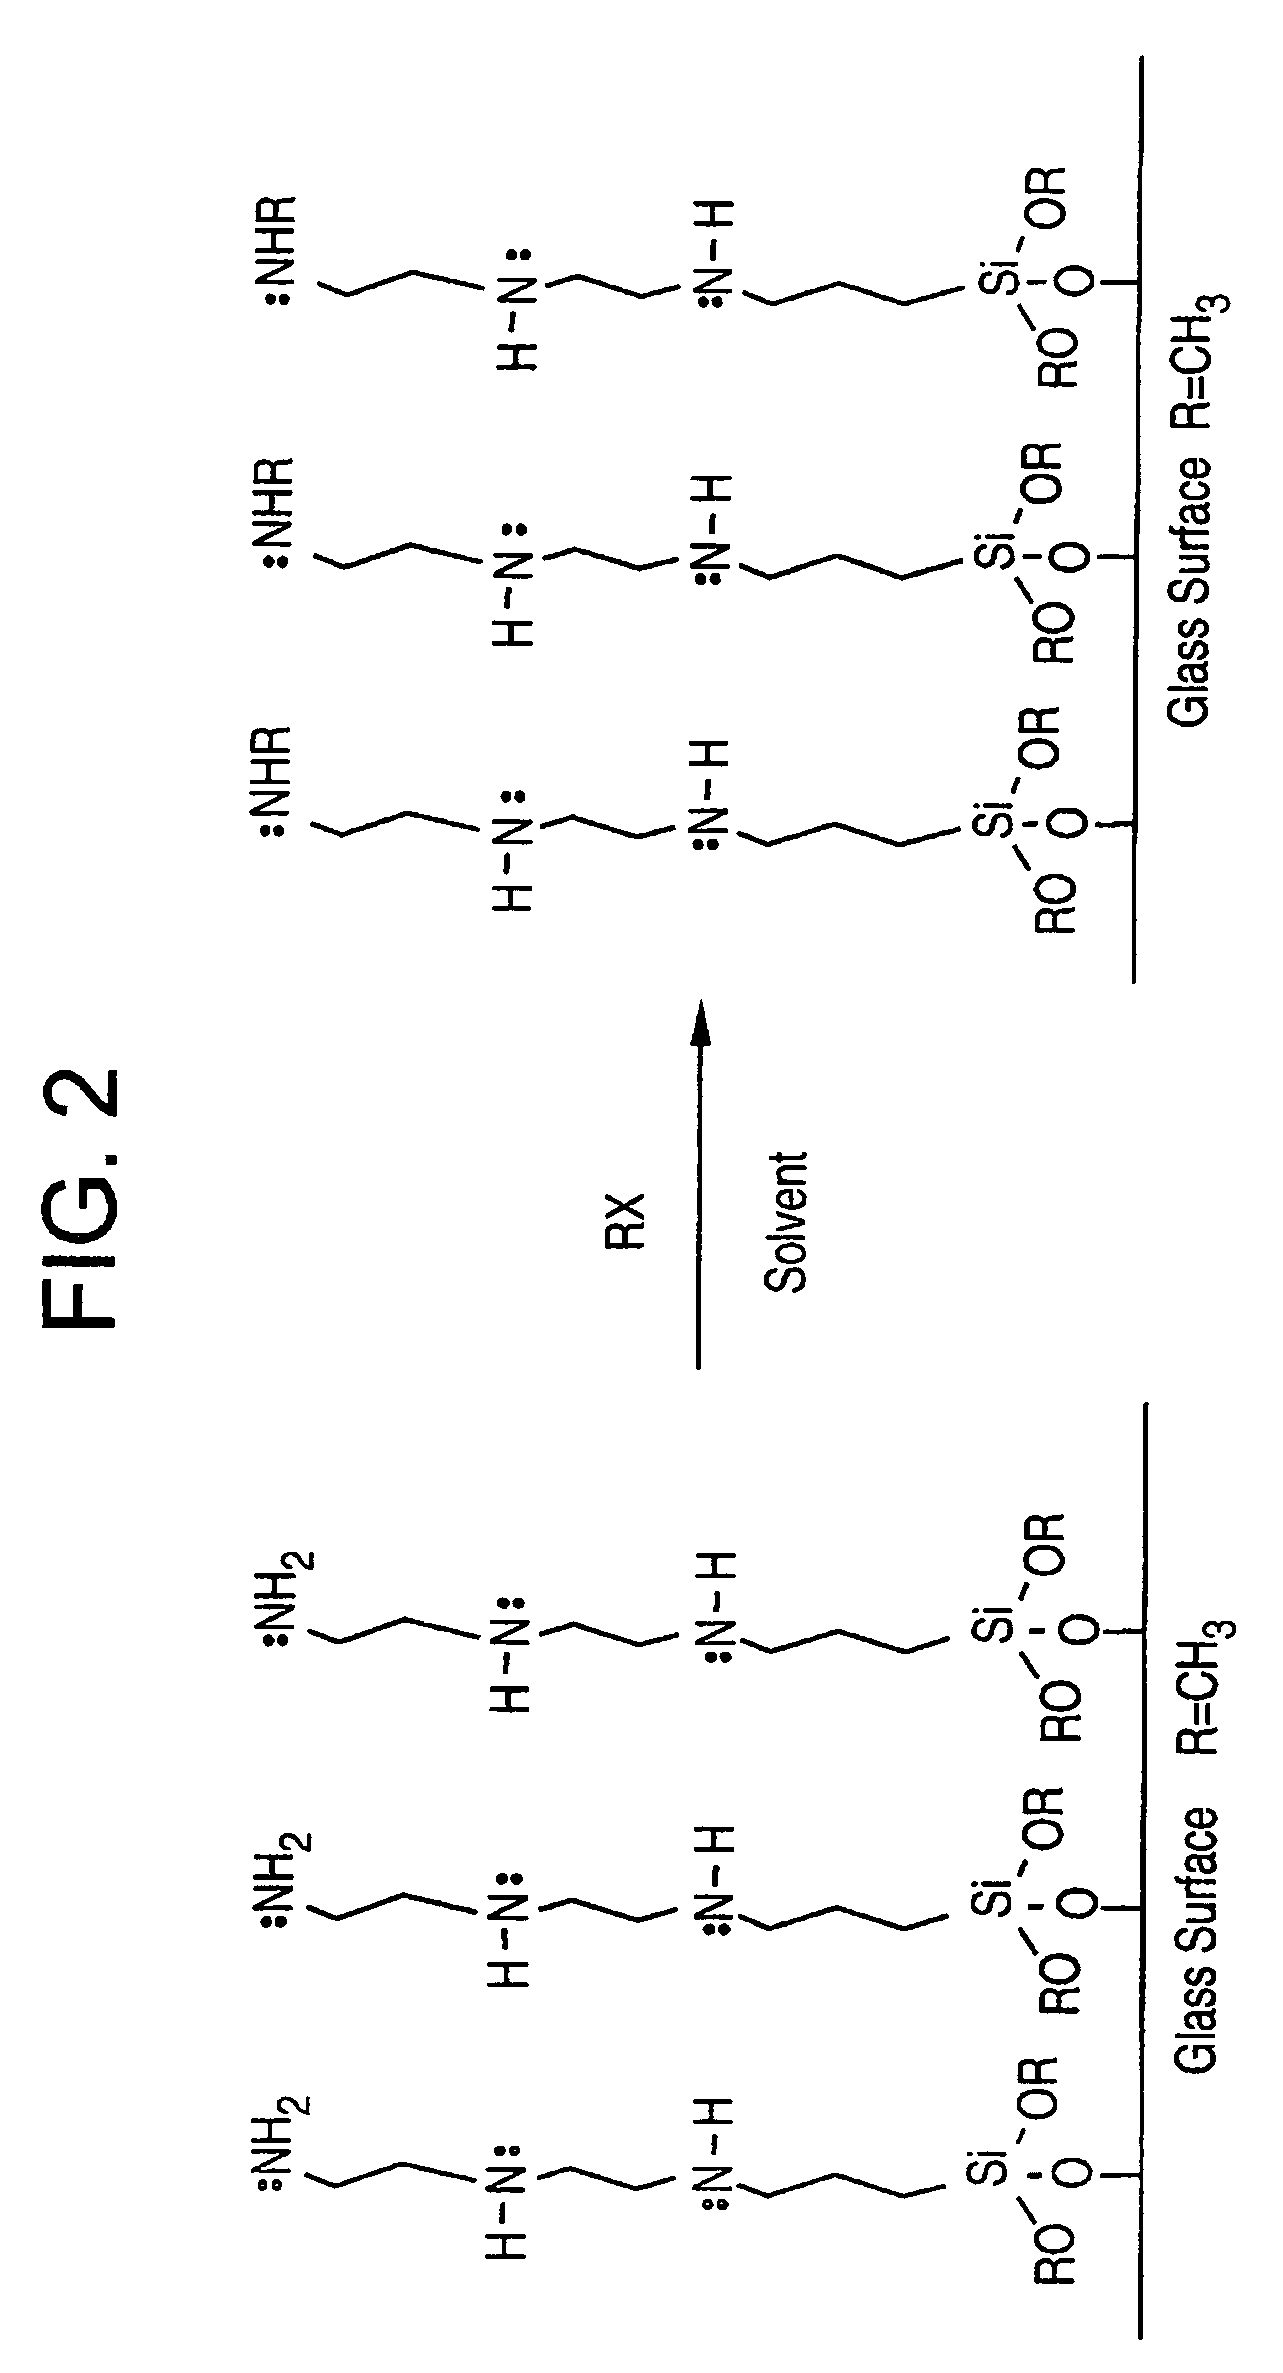 Biomolecule retaining material and methods for attaching biomolecules to a surface